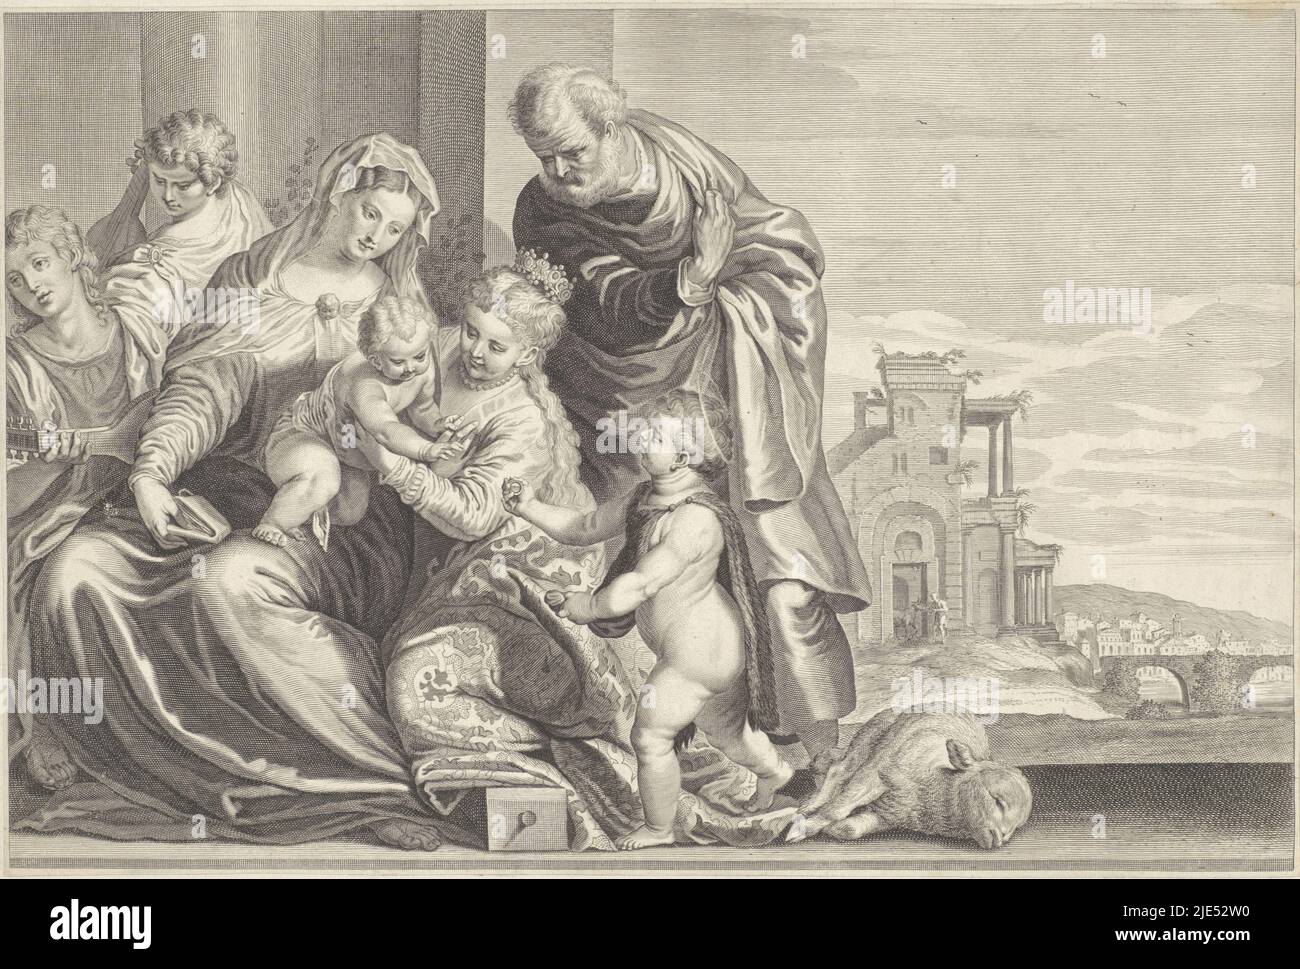 The Christ Child sits on Mary's lap and Joseph watches. Saint Catherine embraces the Christ Child. The young John the Baptist hands out a ring for the mystical marriage between Christ and Saint Catherine. On the far left two musicians. In the background a city by a river, Mystical marriage of Saint Catherine Caelaturae (series title)., print maker: Theodor Matham, after: Paolo Veronese, print maker: Amsterdam, after: Italy, 1646 - 1658, paper, engraving, h 275 mm × w 409 mm Stock Photo